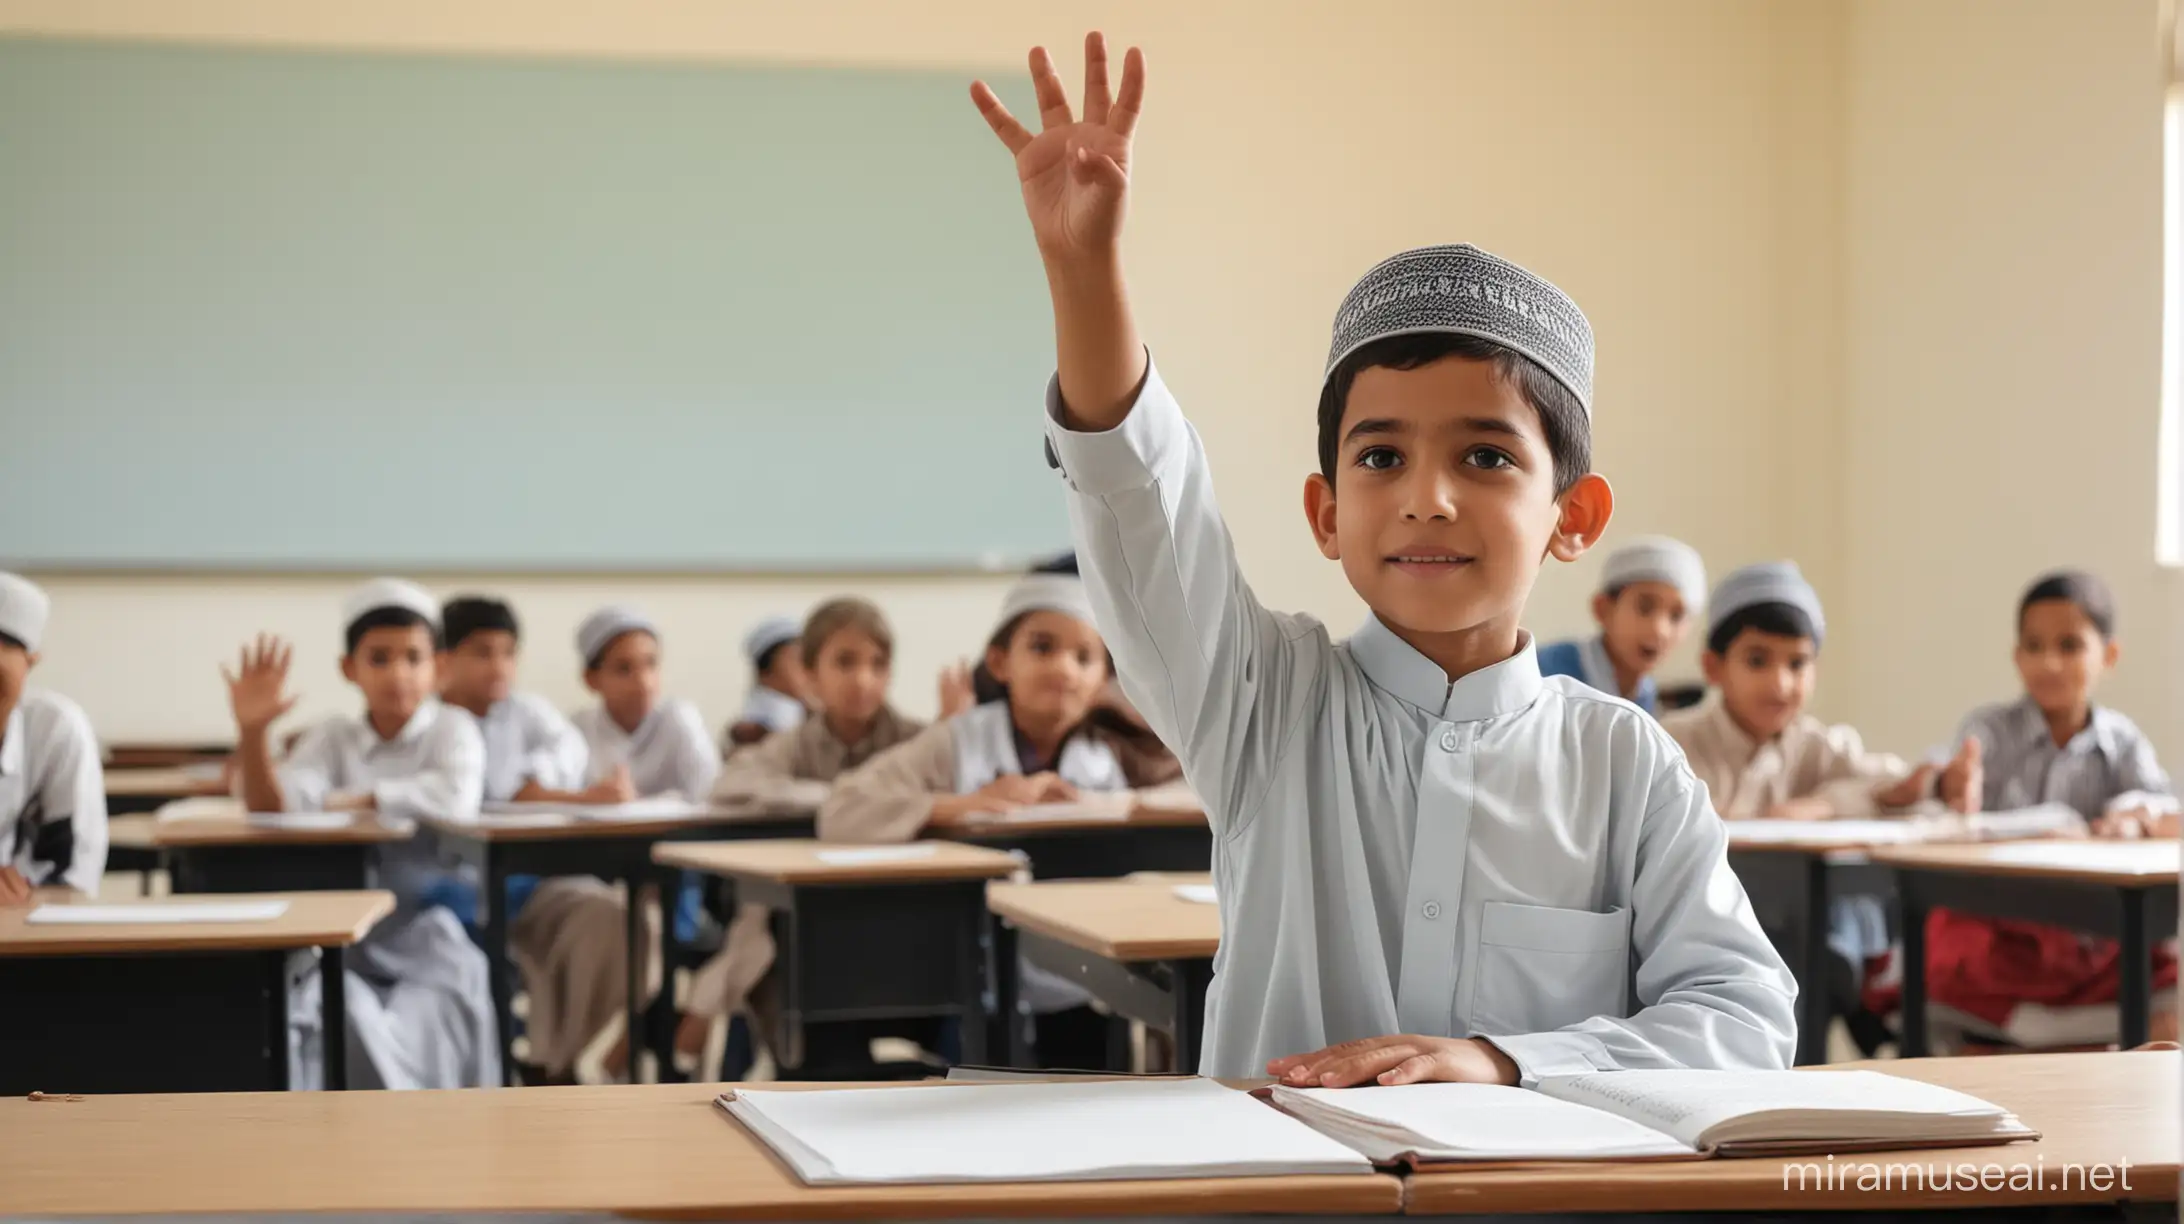 Muslim Boy Participating in Islamic Classroom Discussion